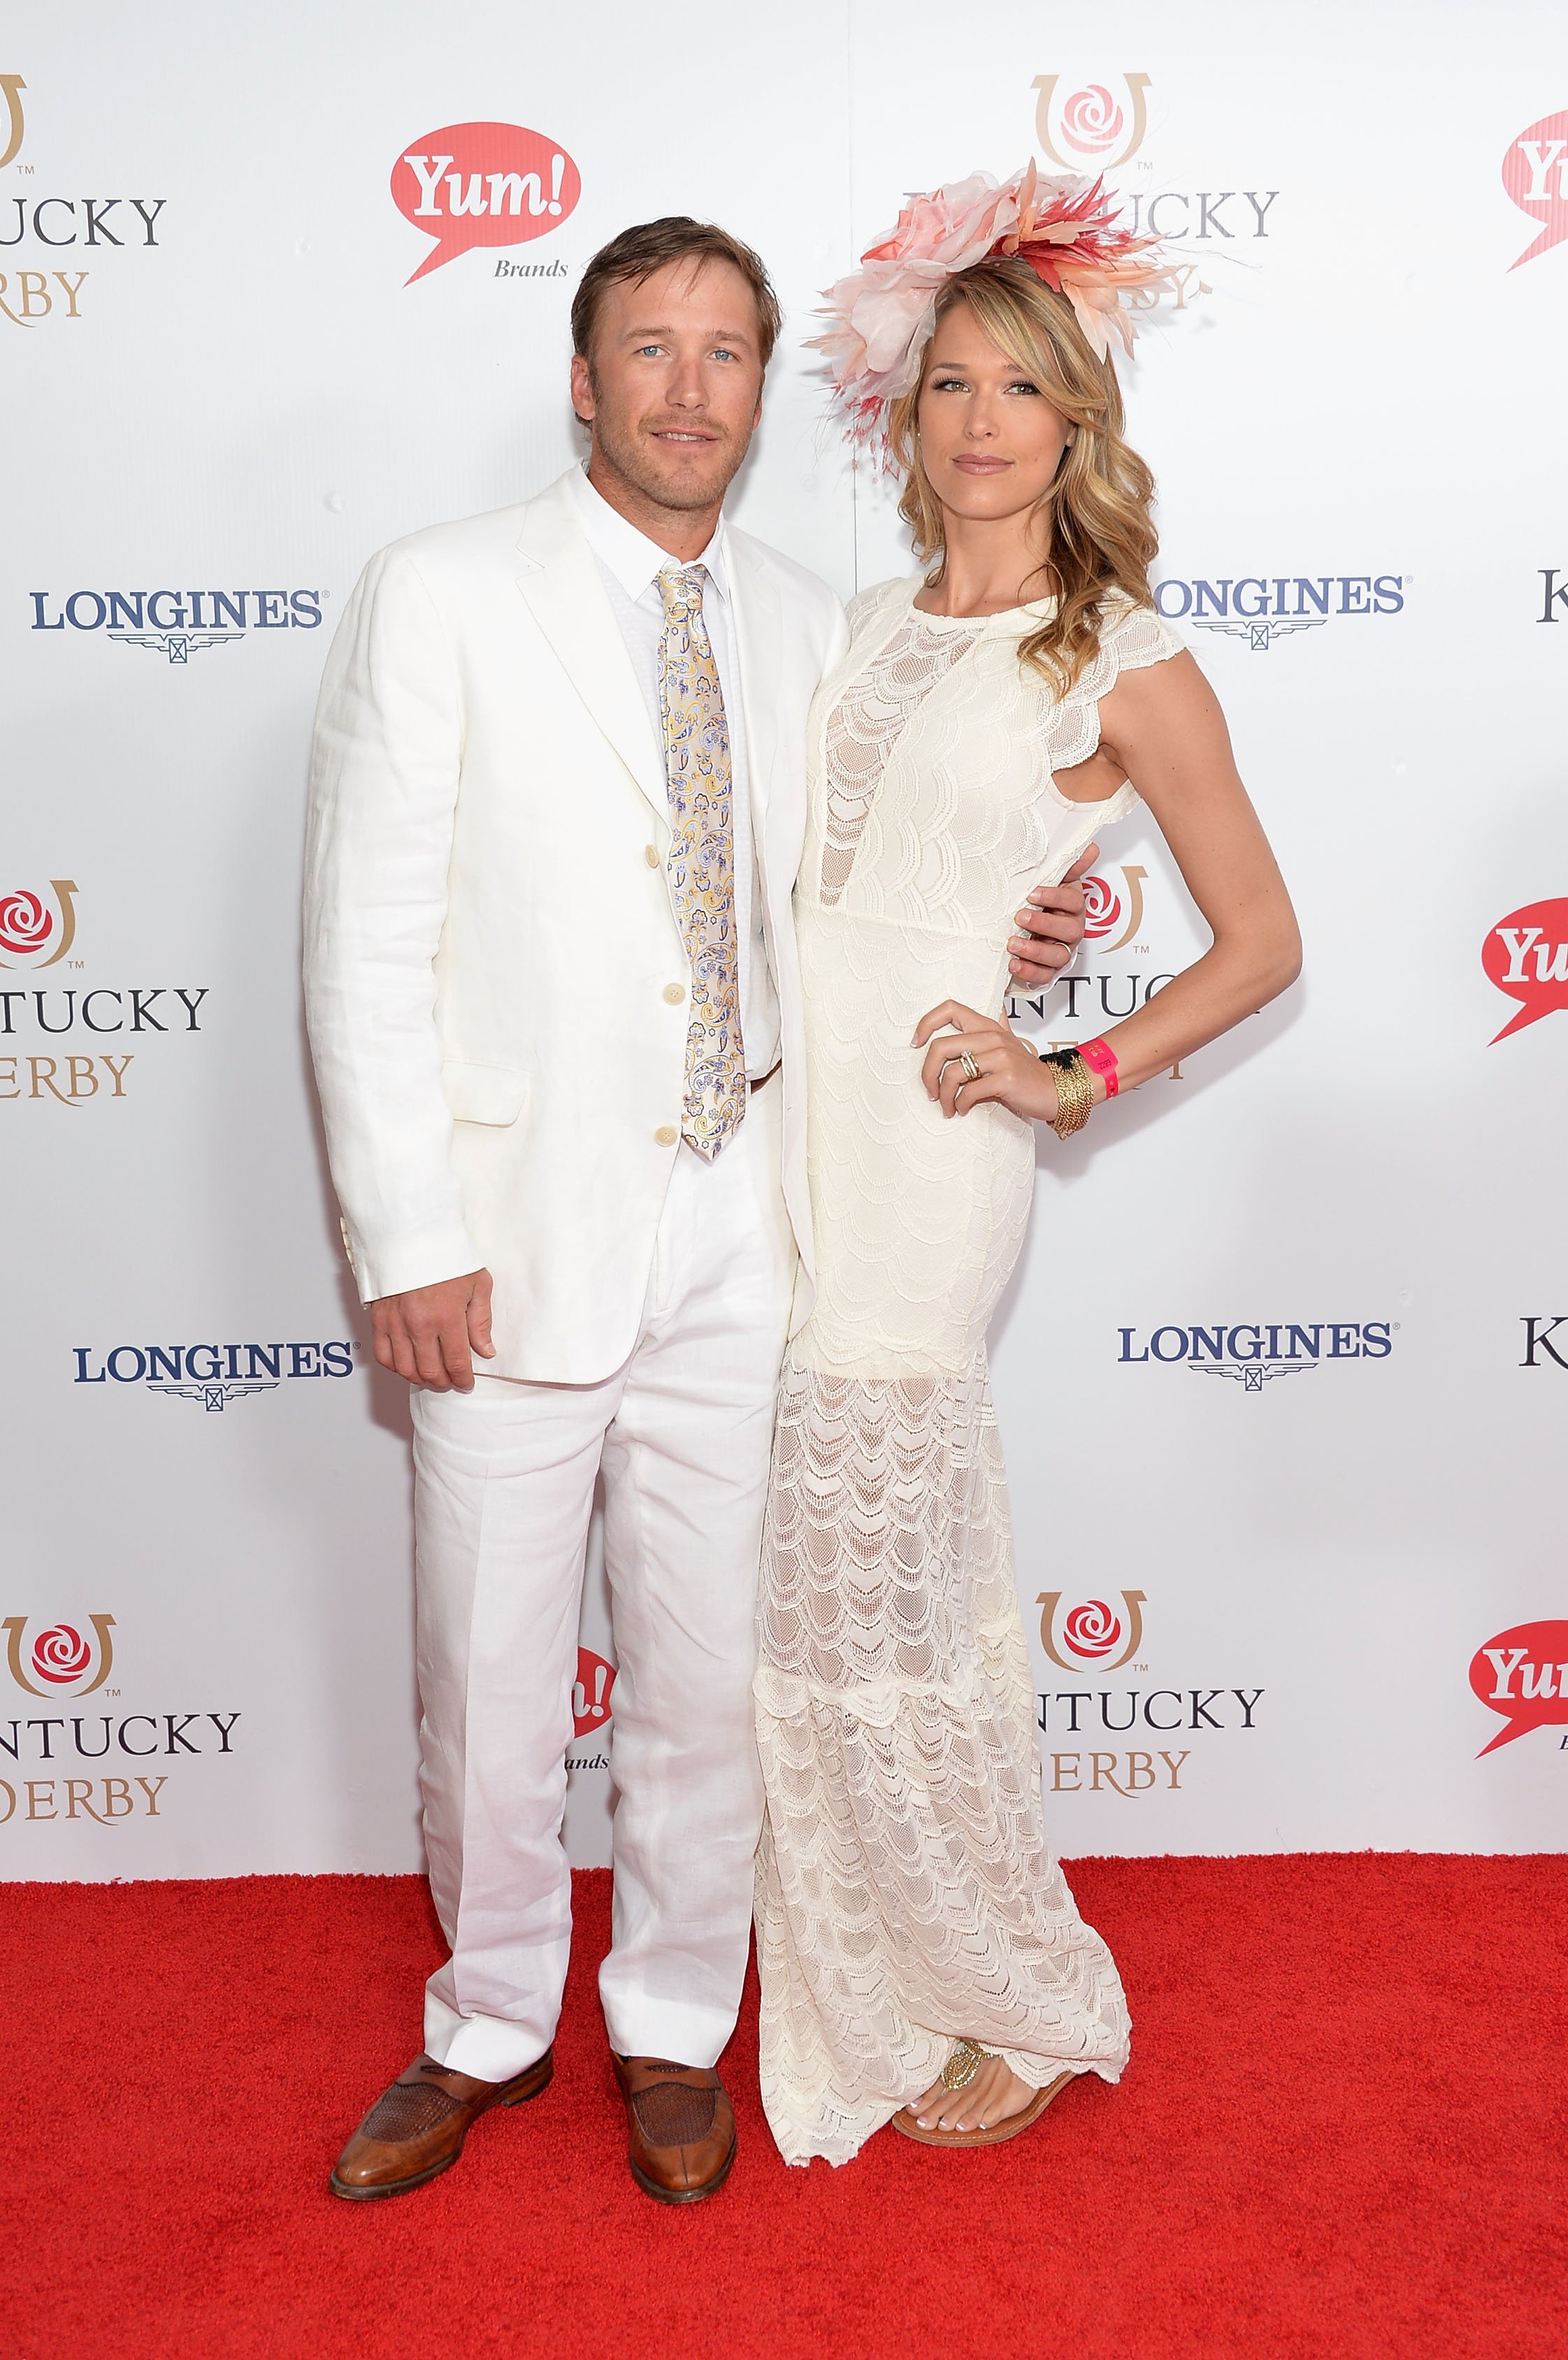 Bode and Morgan Miller at the 140th Kentucky Derby at Churchill Downs on May 3, 2014 in Louisville, Kentucky | Photo: Getty Images